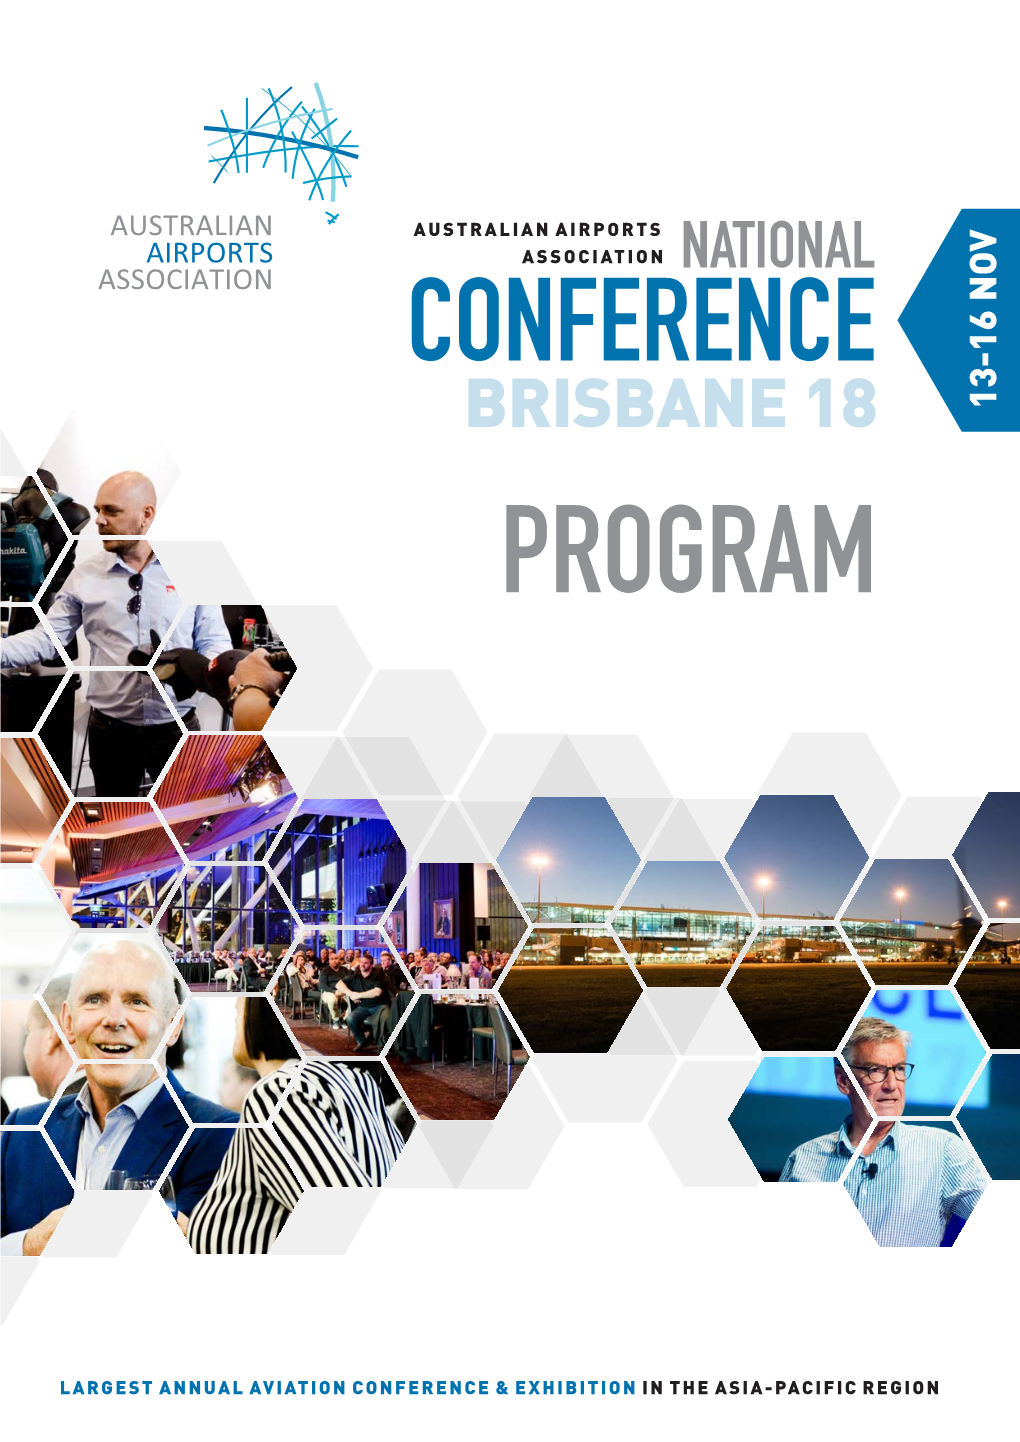 Download the 2018 AAA National Conference Program